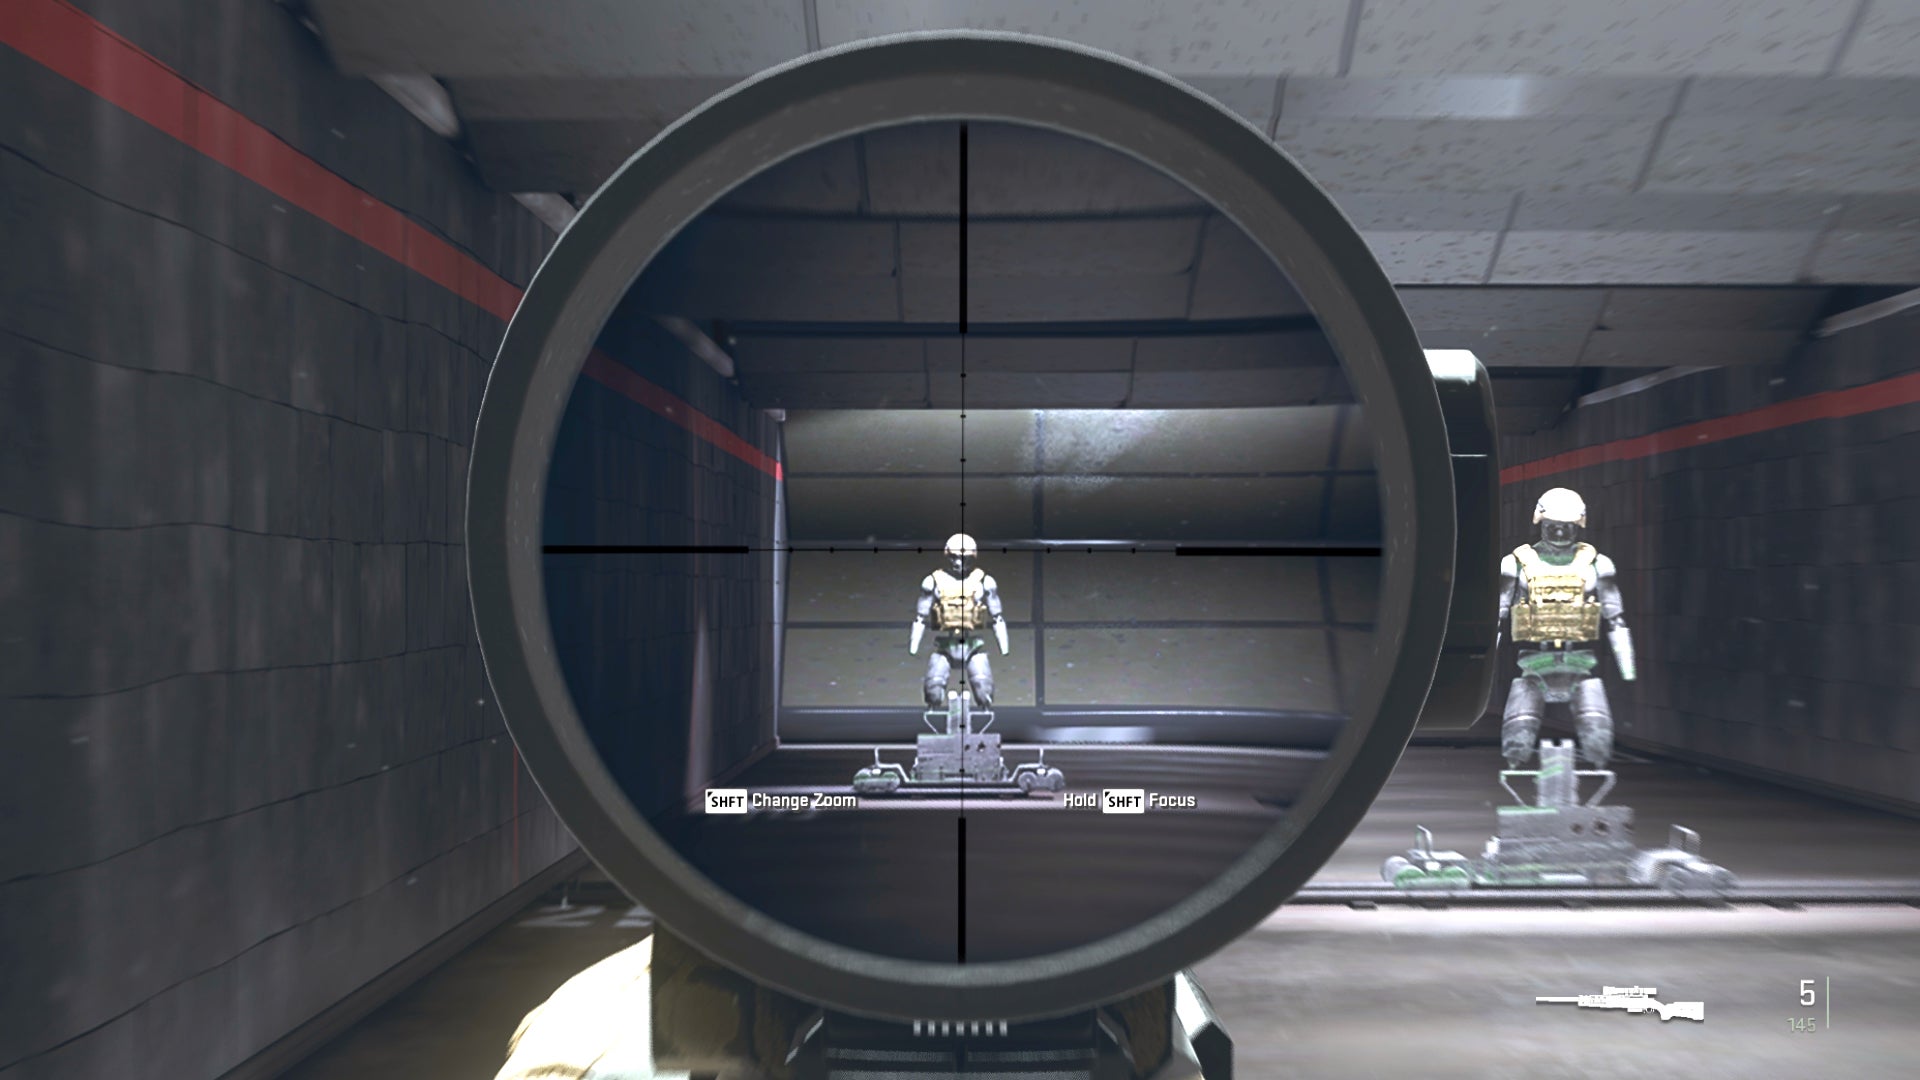 The player in Warzone 2.0 aims at a training dummy with the LA-B 330 default scope.